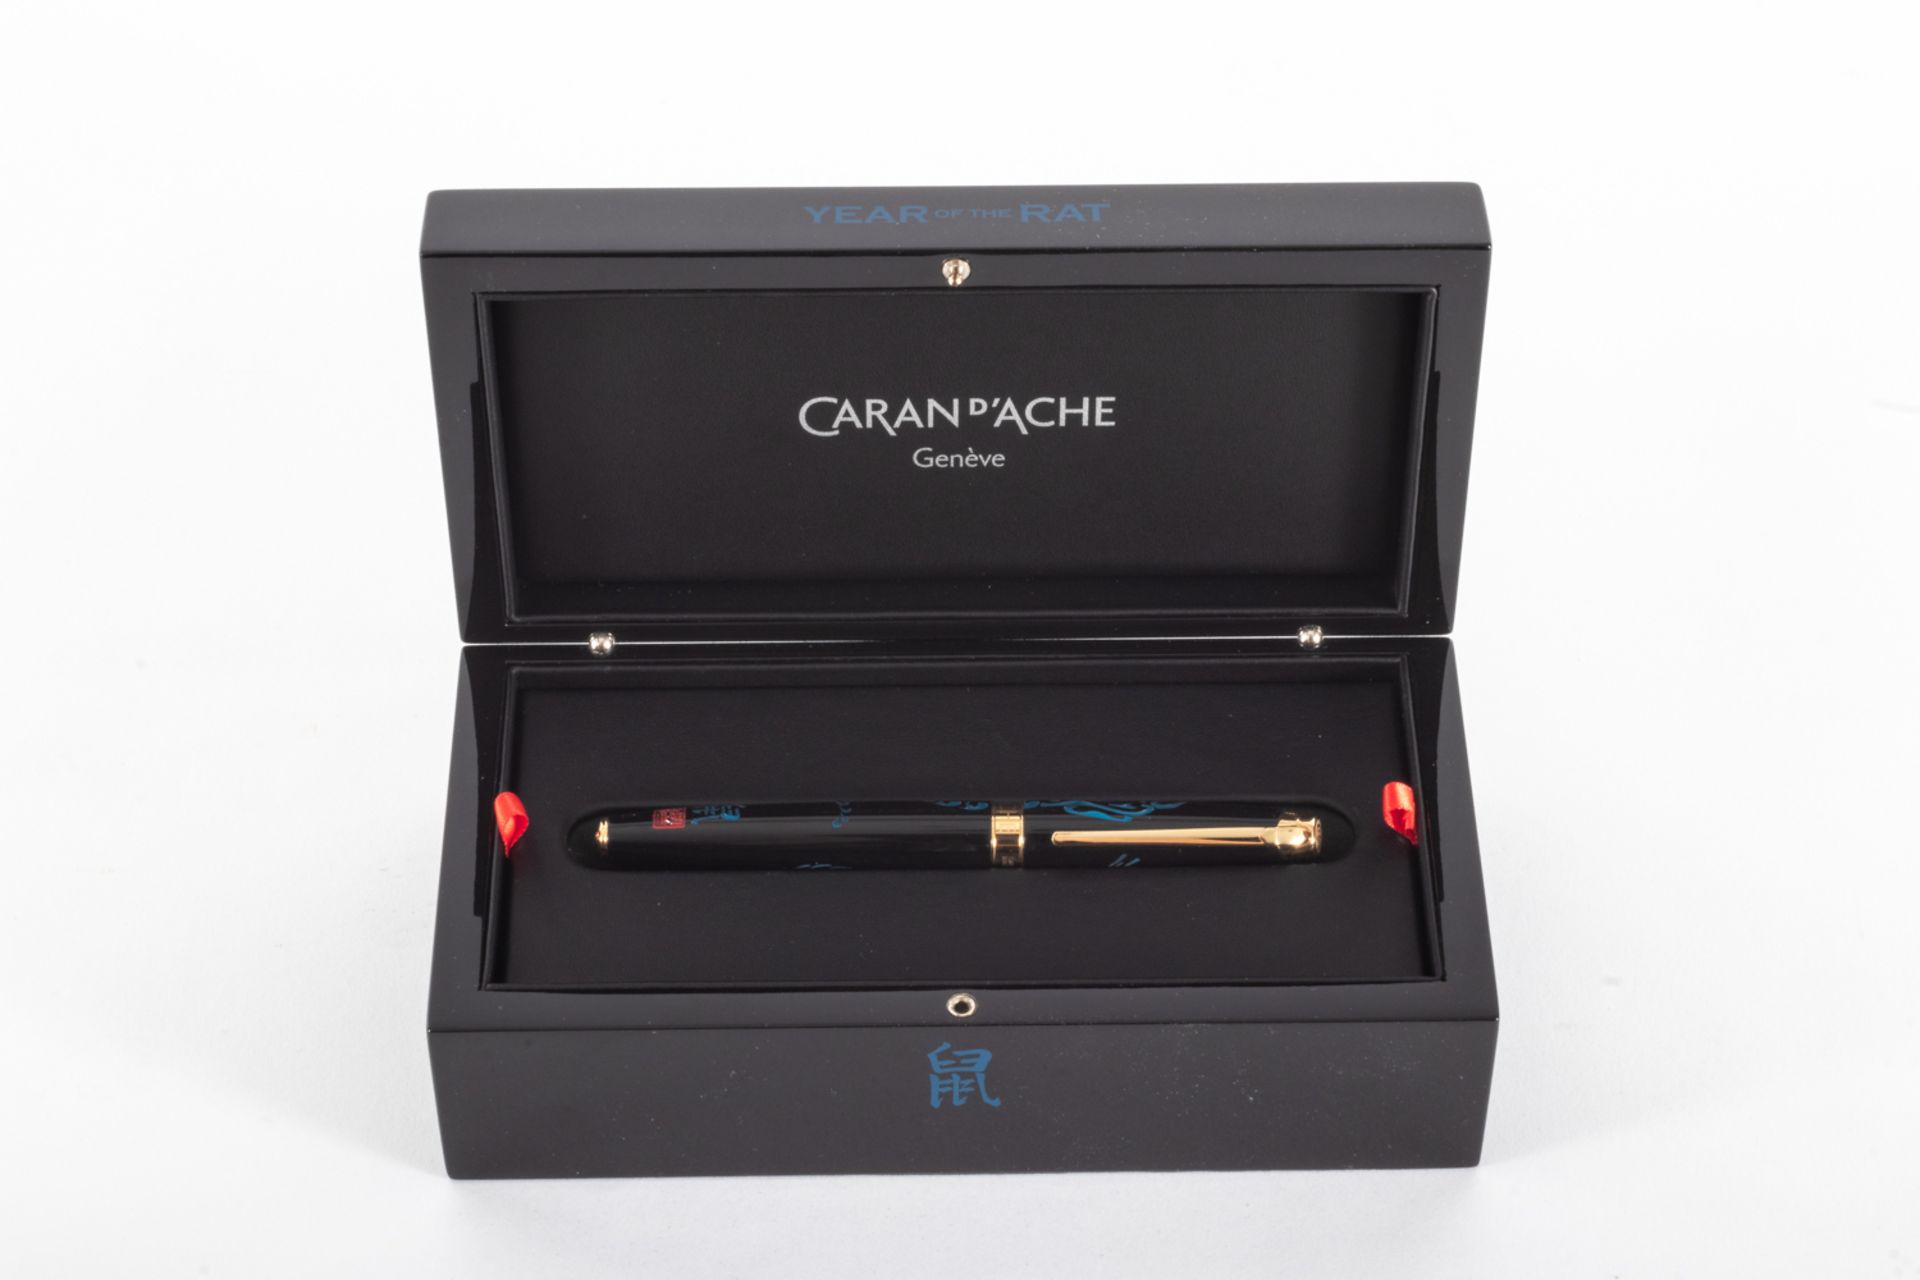 Caran d'Ache fountain pen "Chinese Zodiac" collection model "Year of the Rat", 2020.